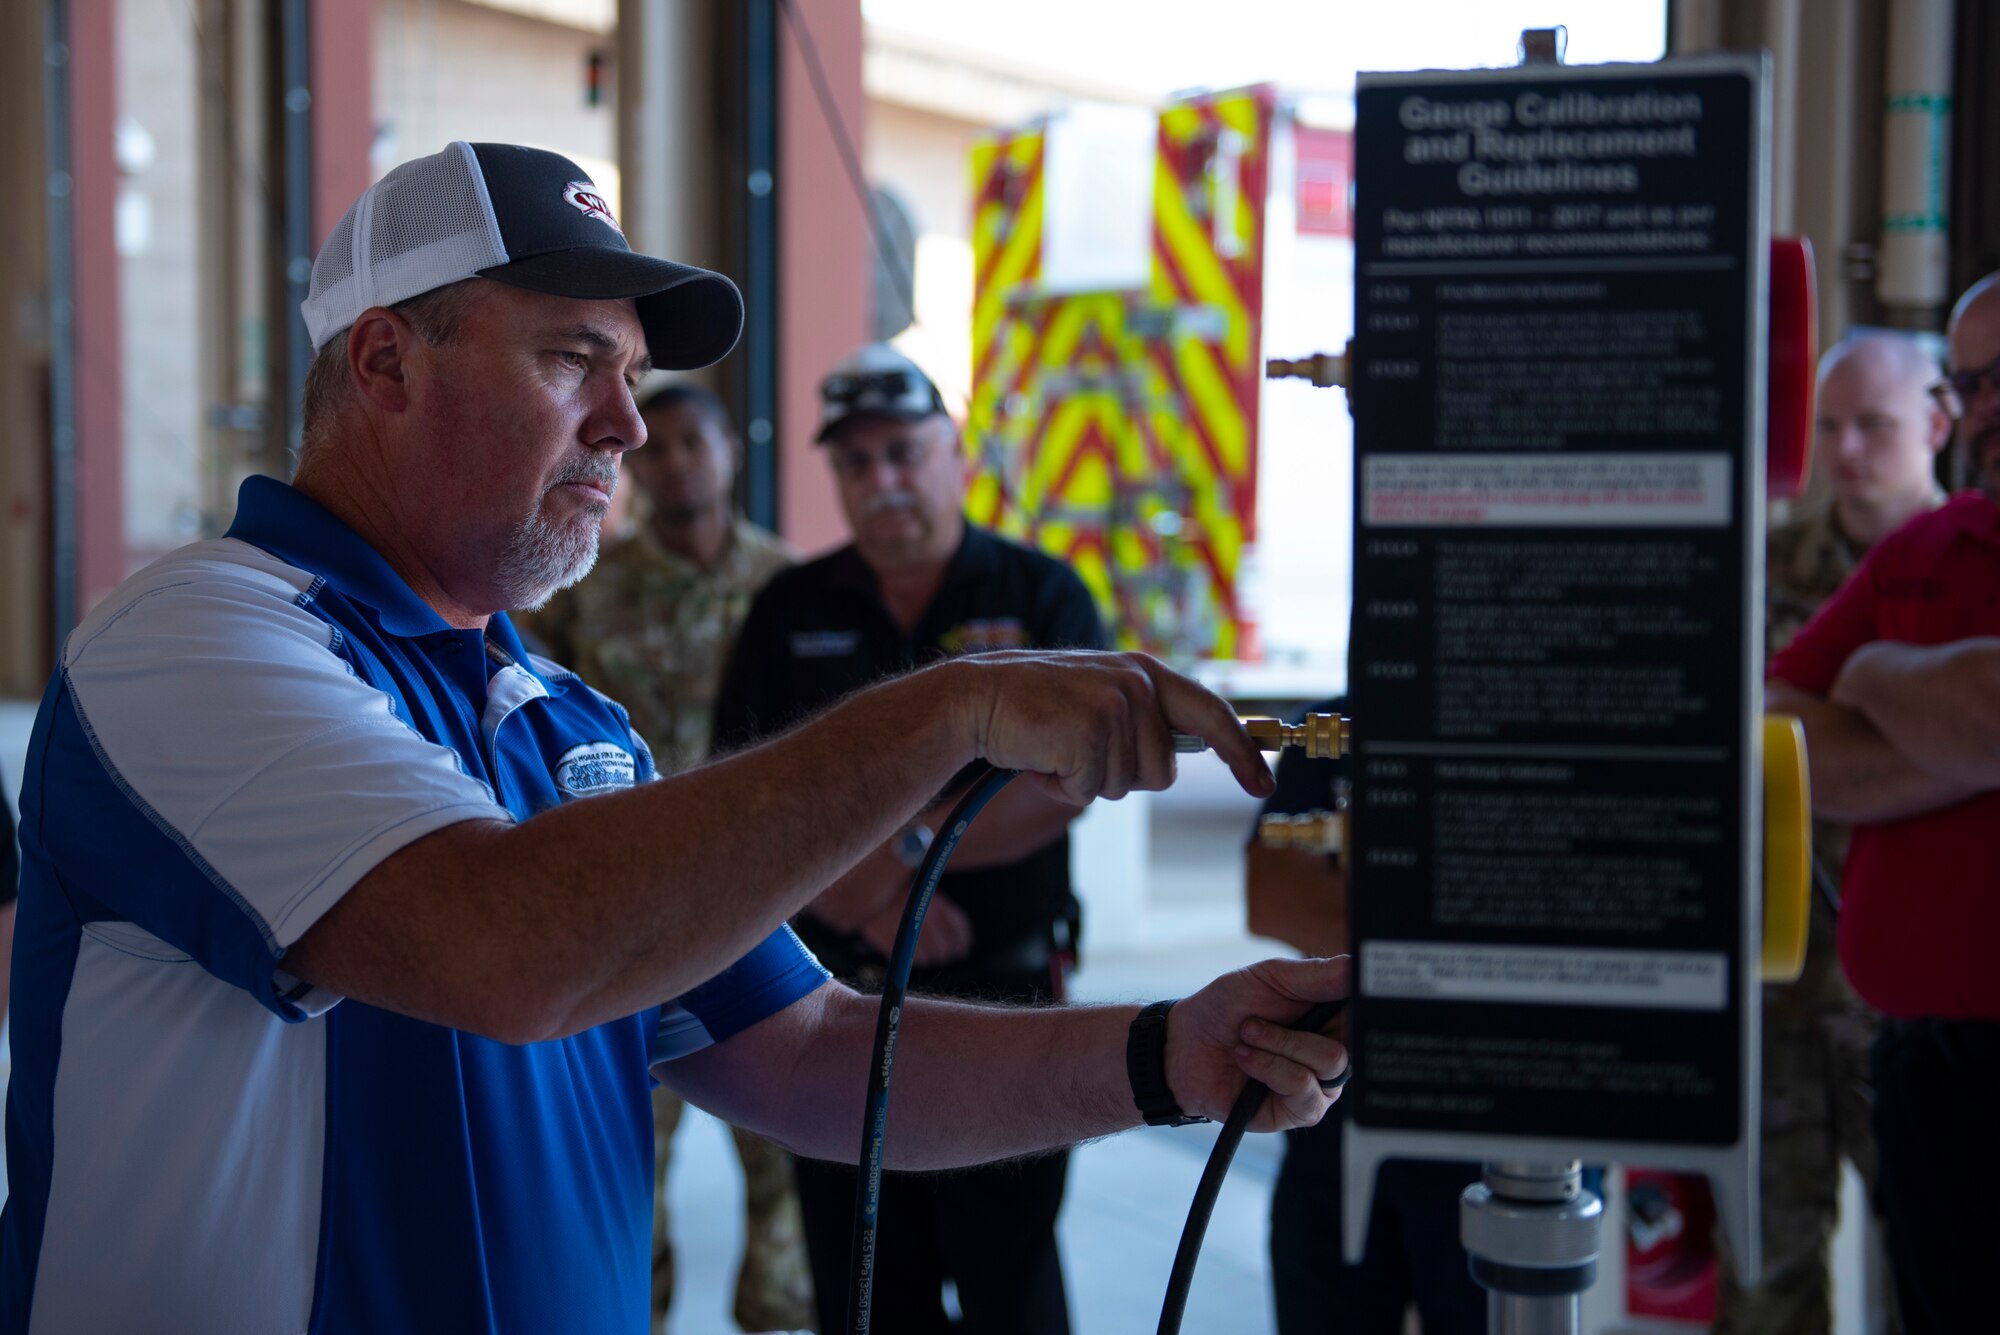 Steven Robertson, Draft Commander training and specialty technician, shows members of the 49th Civil Engineer Squadron on how to properly hook up lines to a master monitor, June 15, 2022, on Holloman Air Force Base, New Mexico.